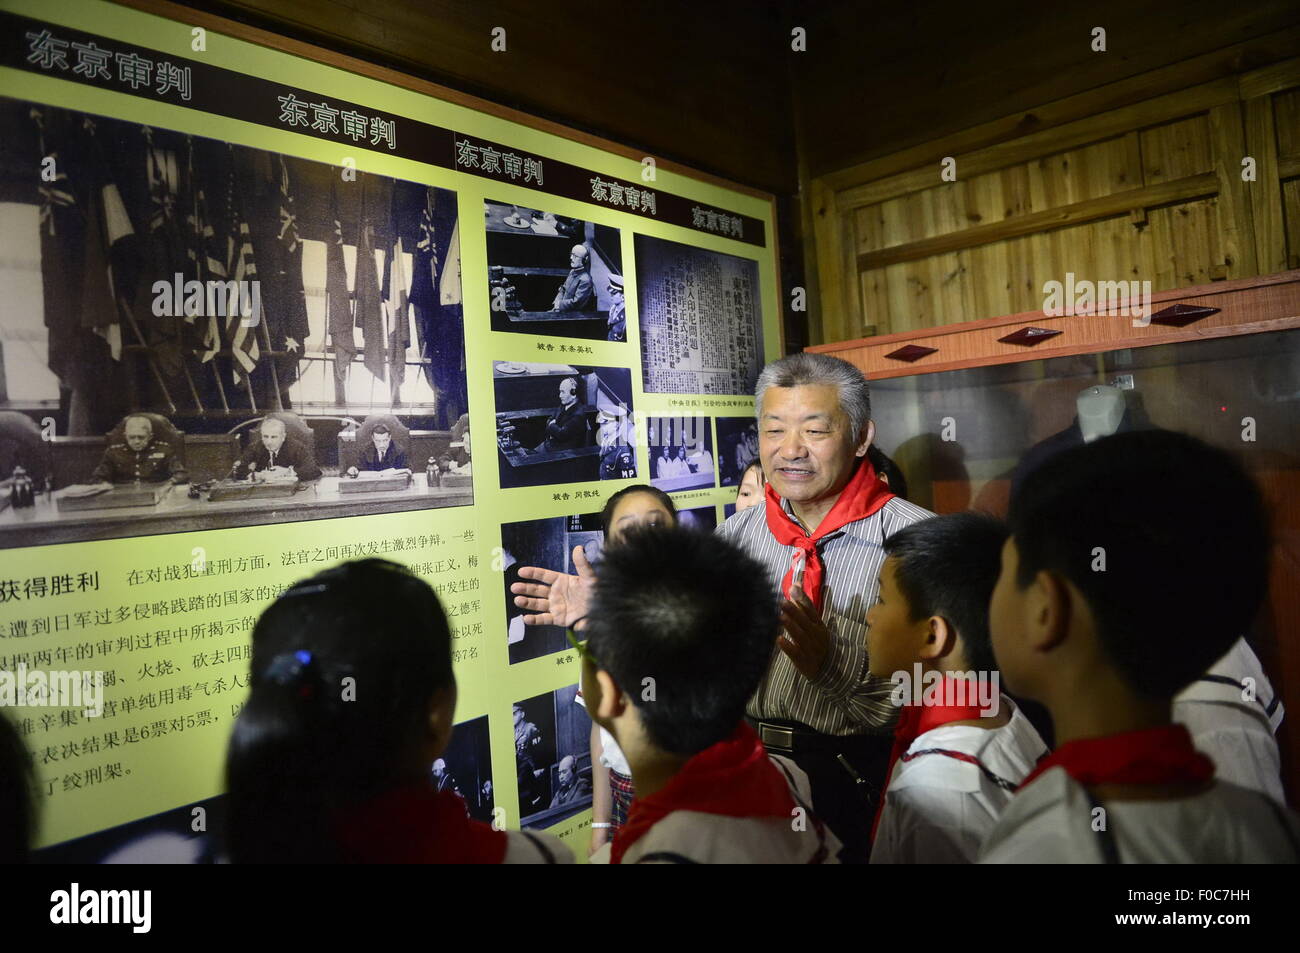 (150812) -- NANCHANG, Aug. 12, 2015 (Xinhua) -- Mei Xiao'ao, son of Mei Ru'ao, the Chinese judge at the International Military Tribunal for the Far East, presents the history about Tokyo trials to students at his father's former residence during an activity marking the 70th anniversary of victory in the Chinese People's War of Resistance Against Japanese Aggression in Qingyunpu District of Nanchang, east China's Jiangxi Province, Aug. 12, 2015. (Xinhua/Zhou Mi) (xcf) Stock Photo